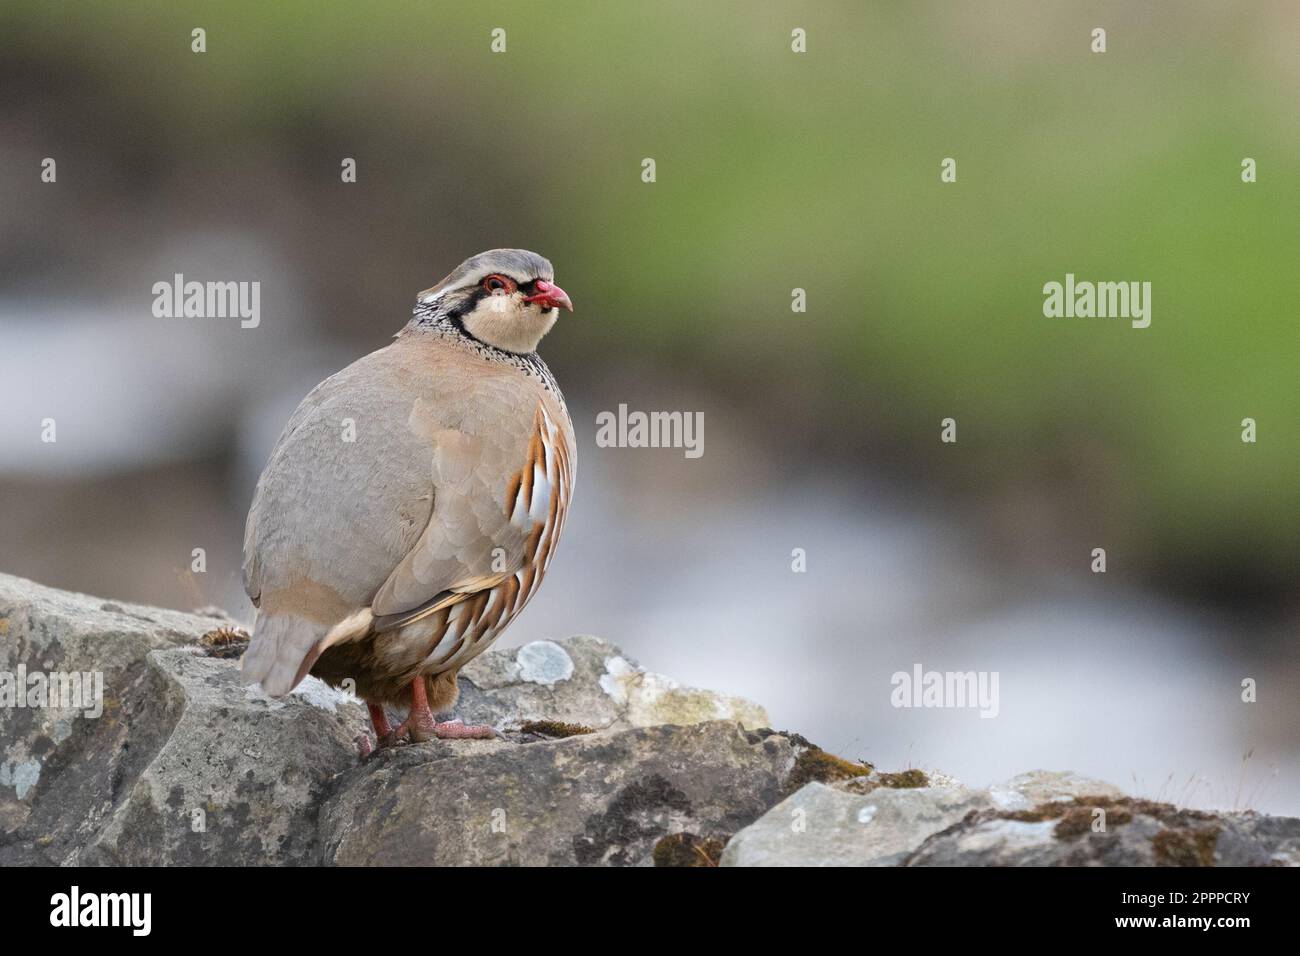 Red-legged partridge - alectoris rufa - standing on dry stone wall - Yorkshire Dales, England, UK Stock Photo